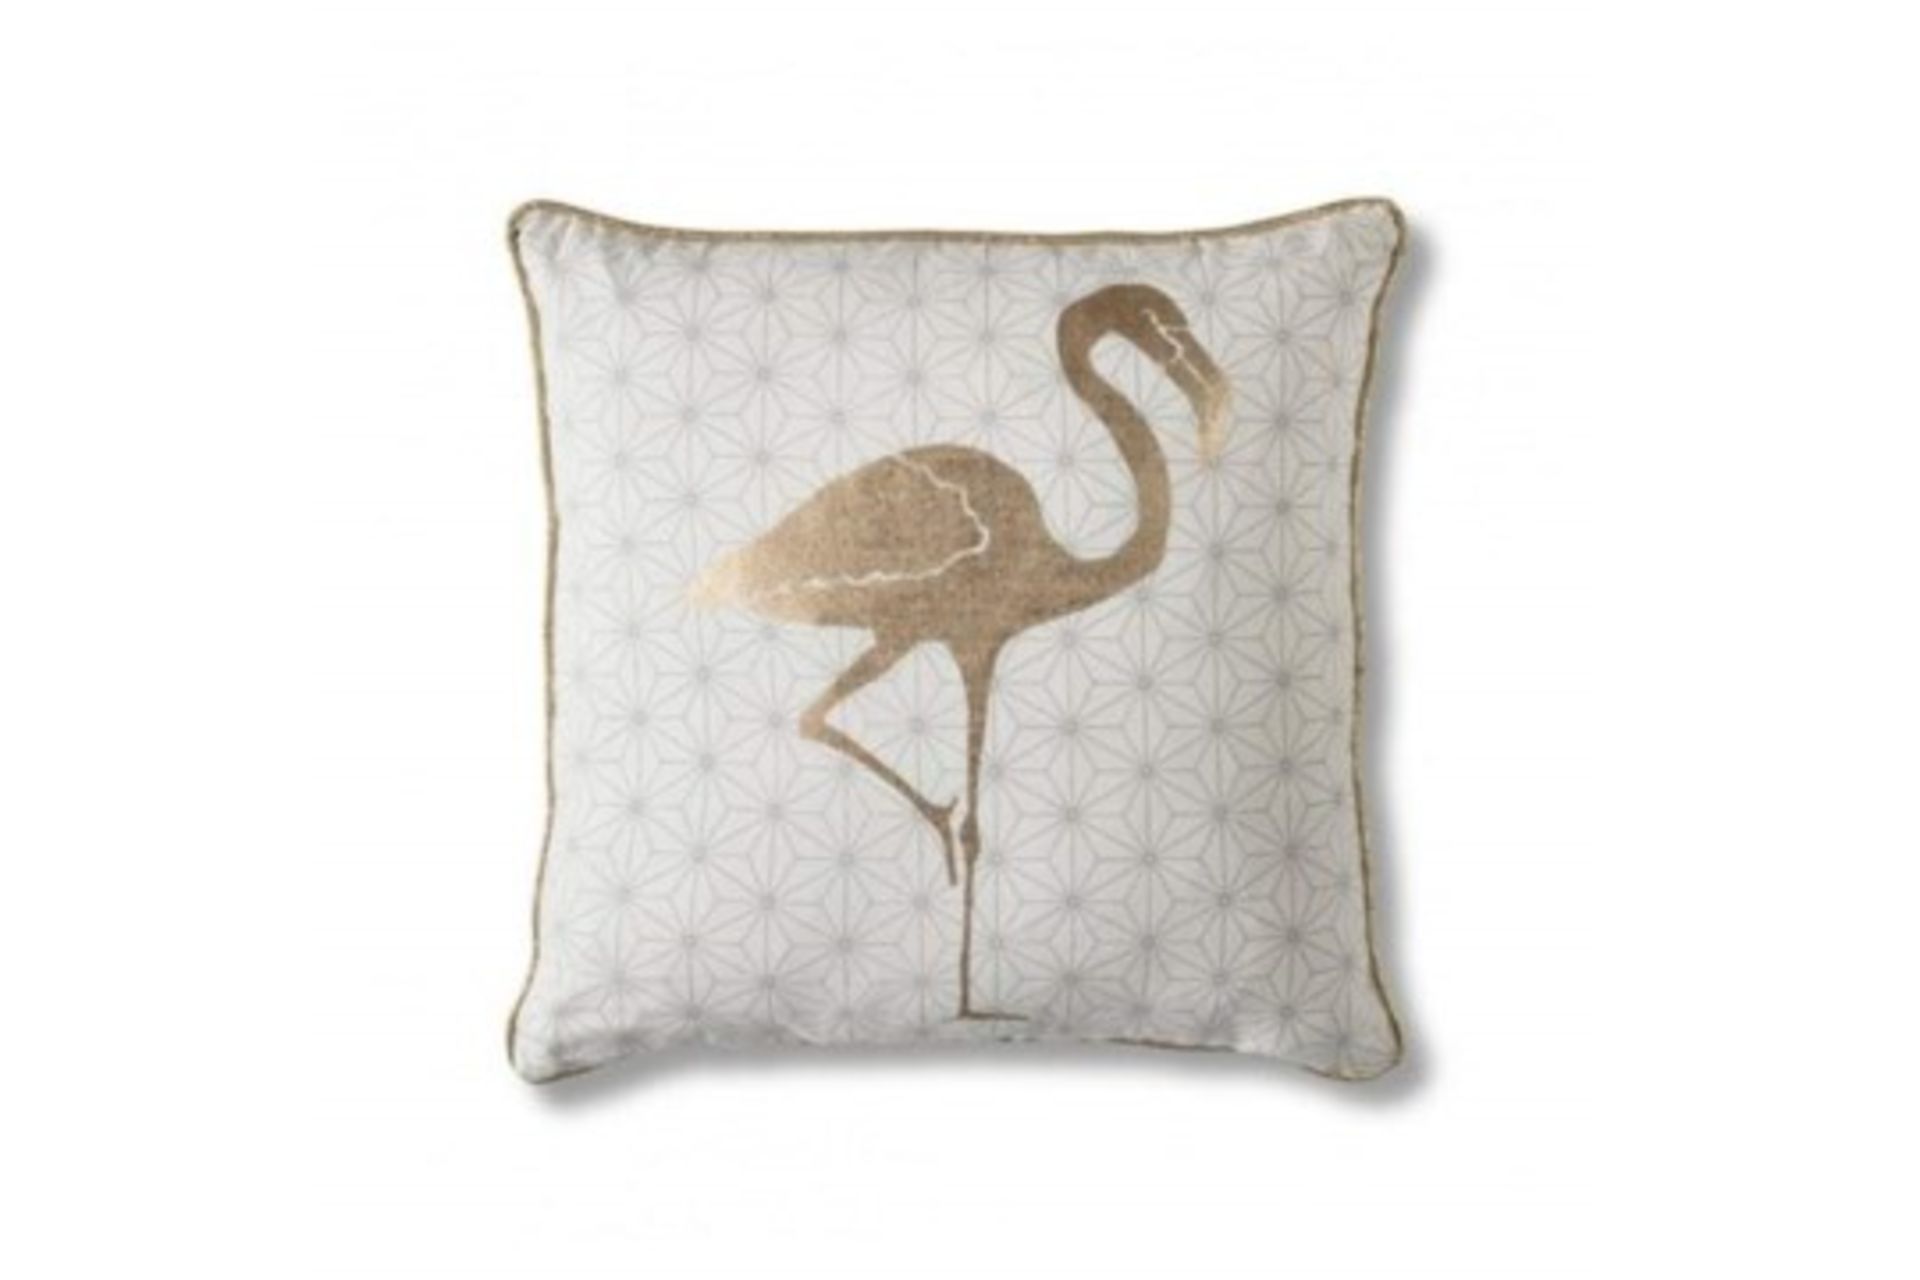 4 x Golden Flamingo Feather Filled Geo Cushion The Modern Geometric Background Is Overlaid With A